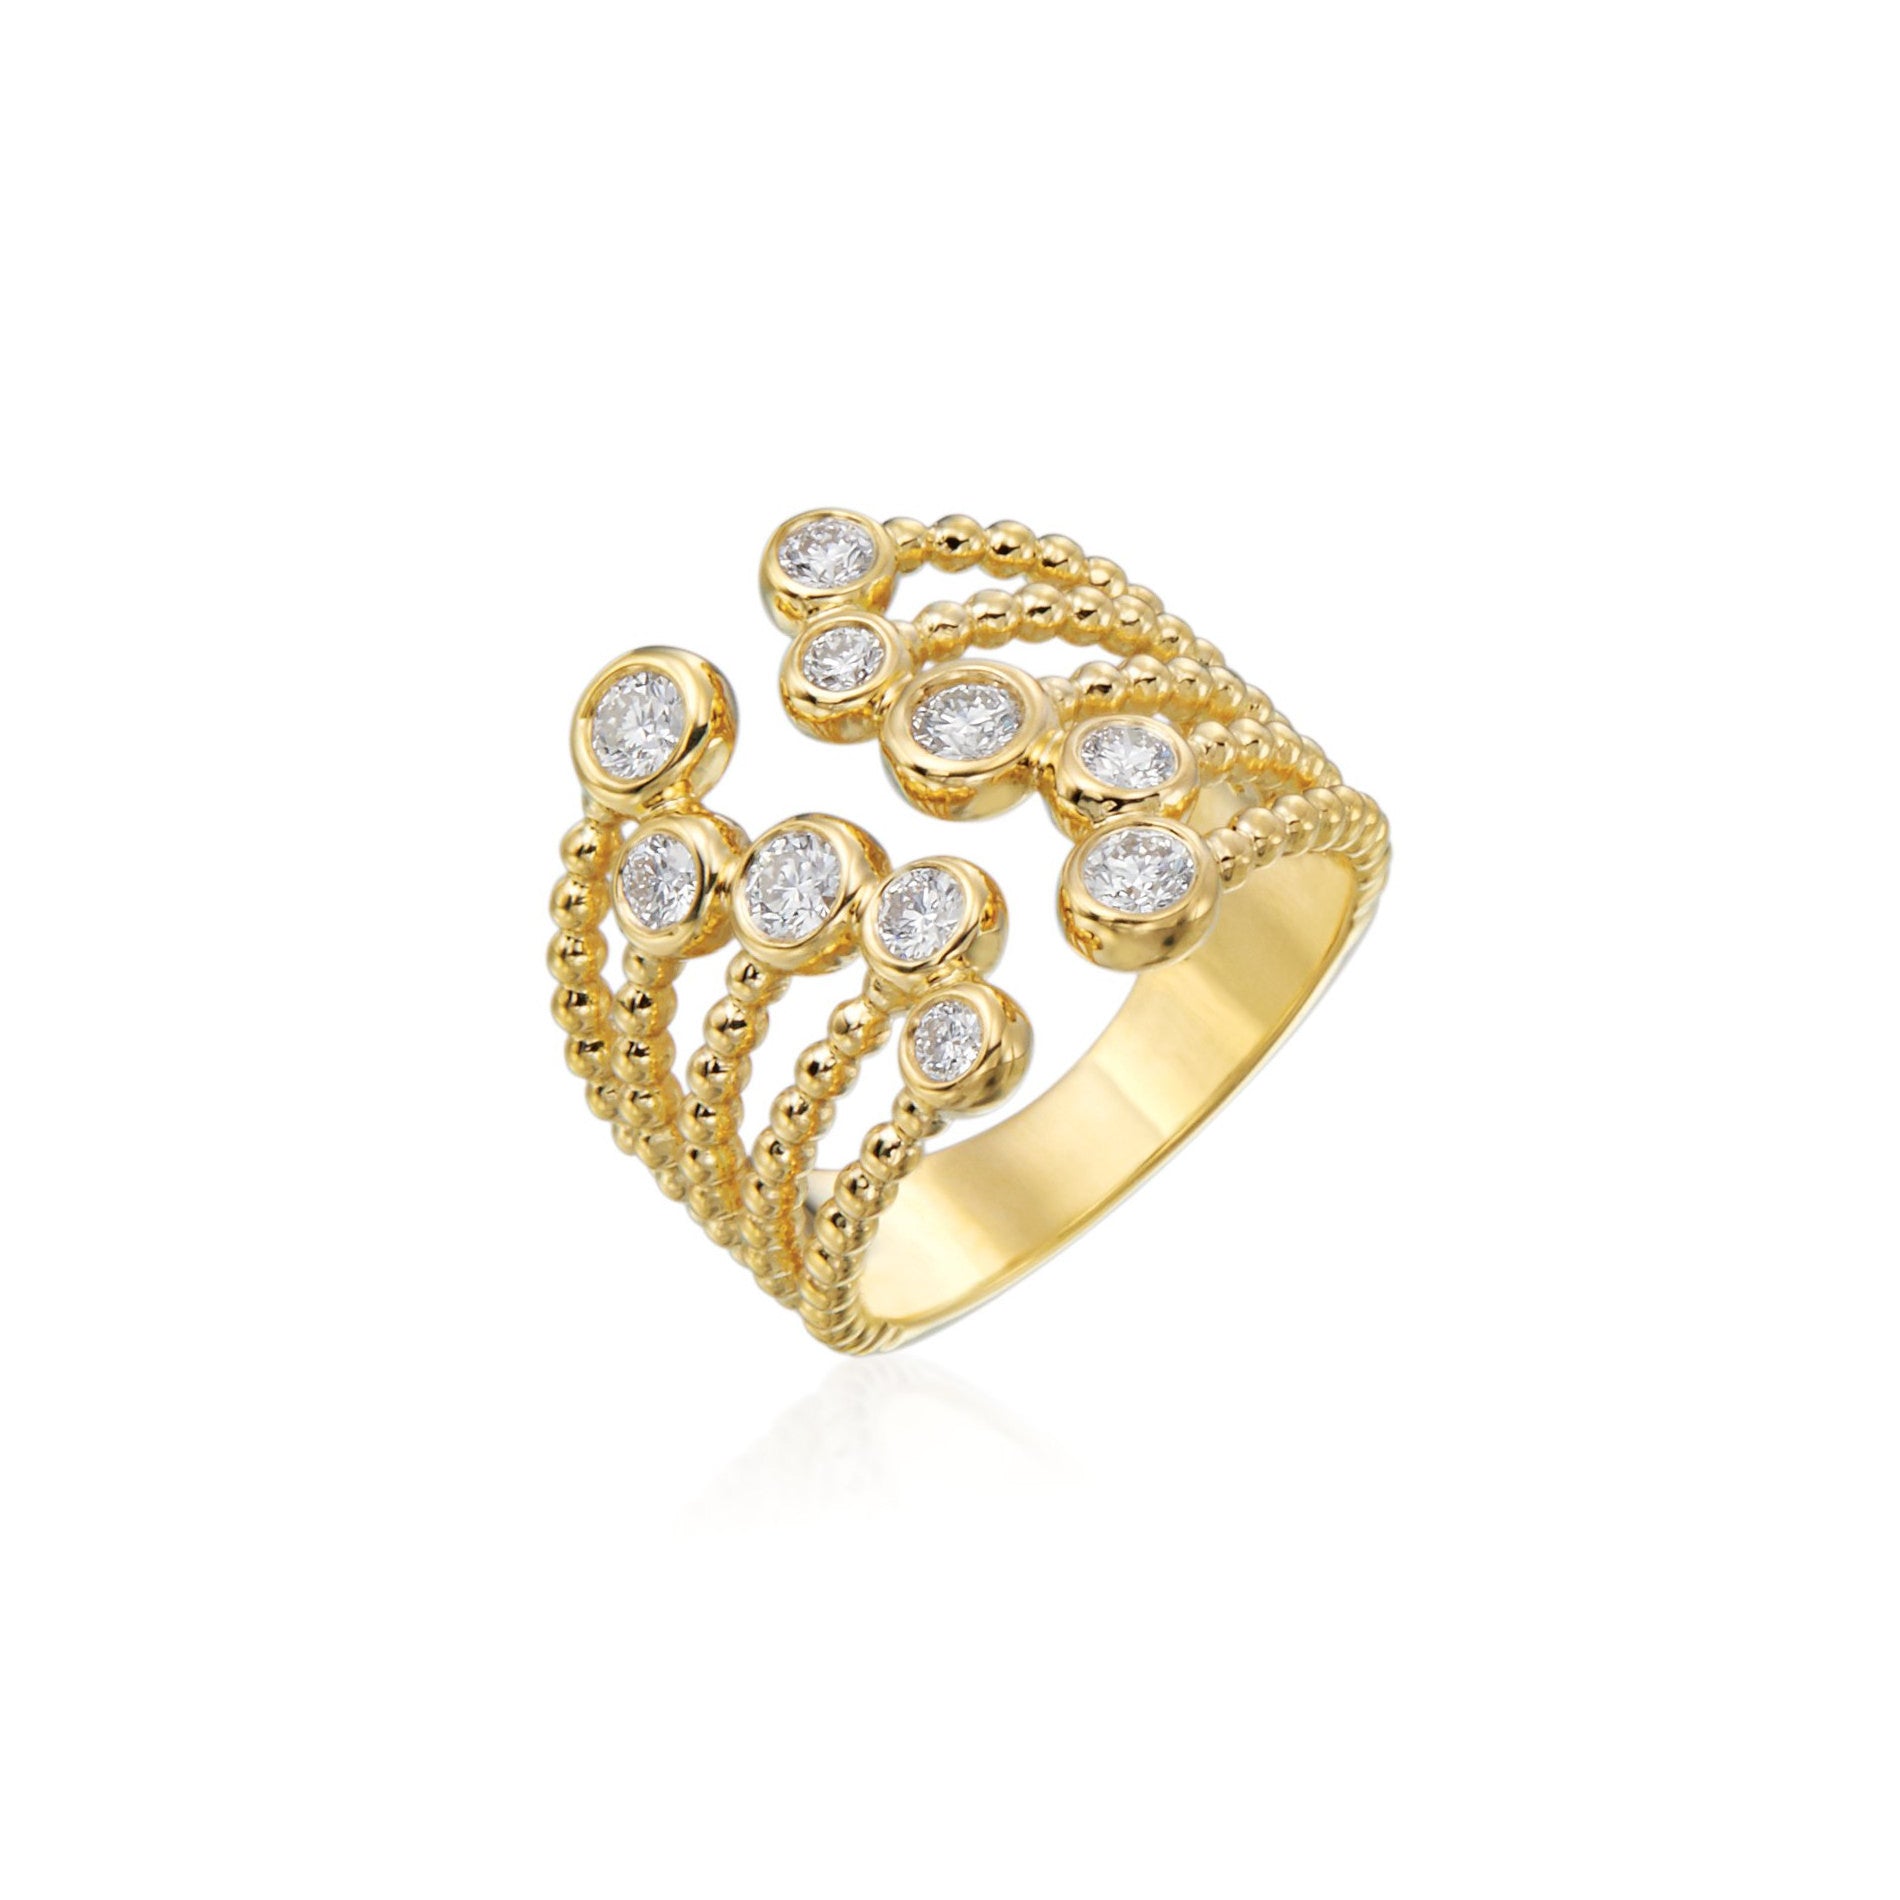 Beaded Gold and Diamond Ring